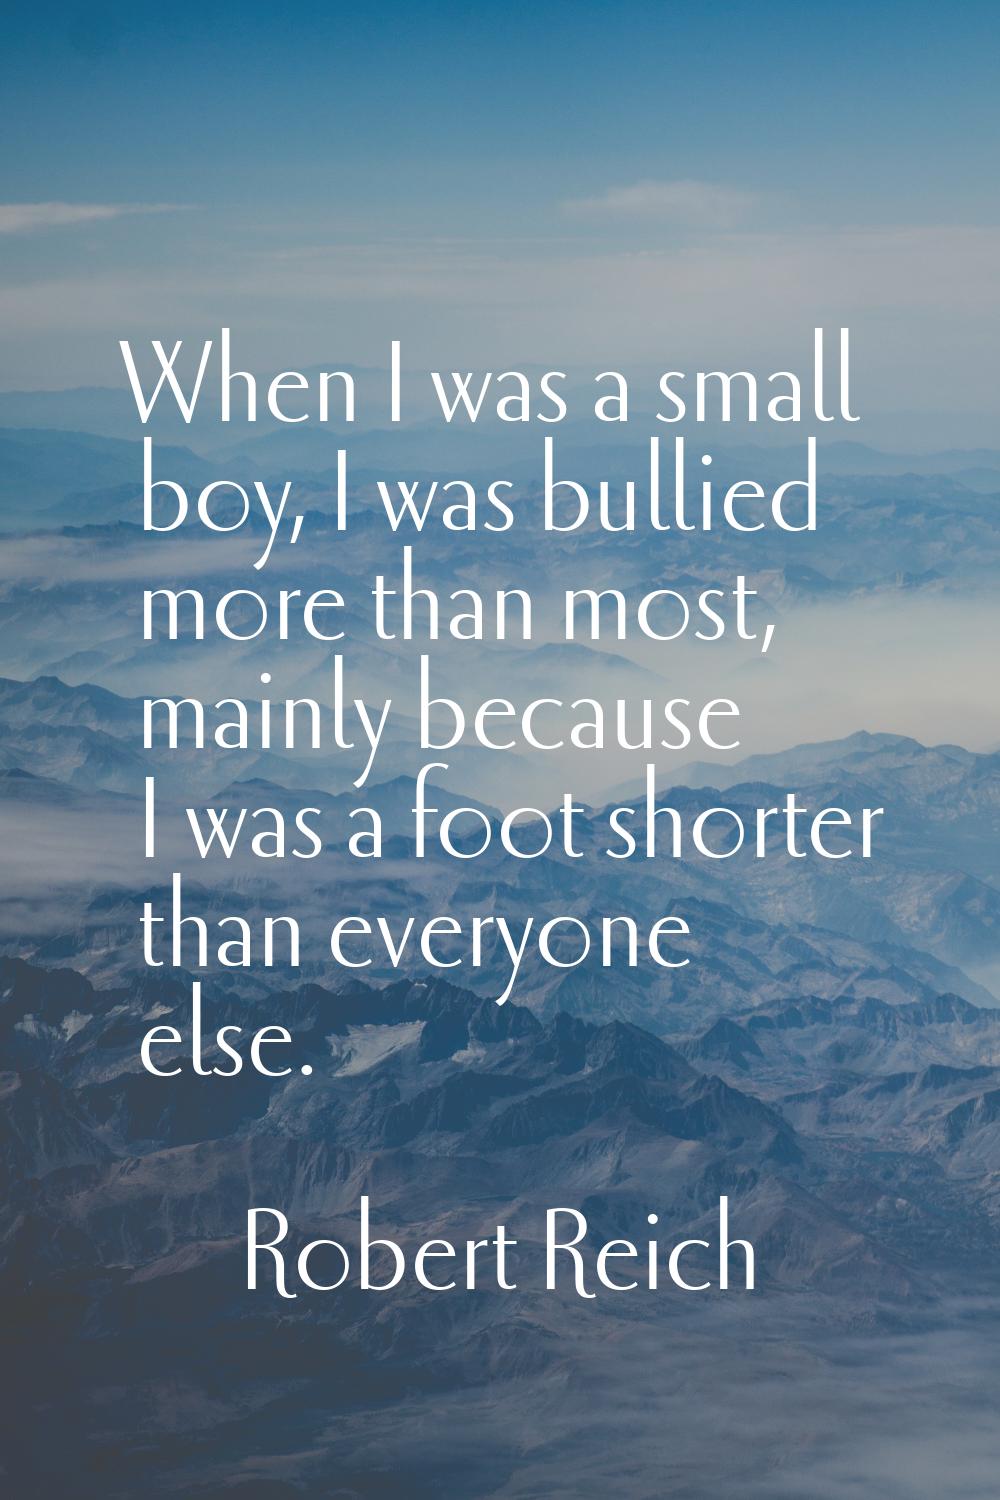 When I was a small boy, I was bullied more than most, mainly because I was a foot shorter than ever